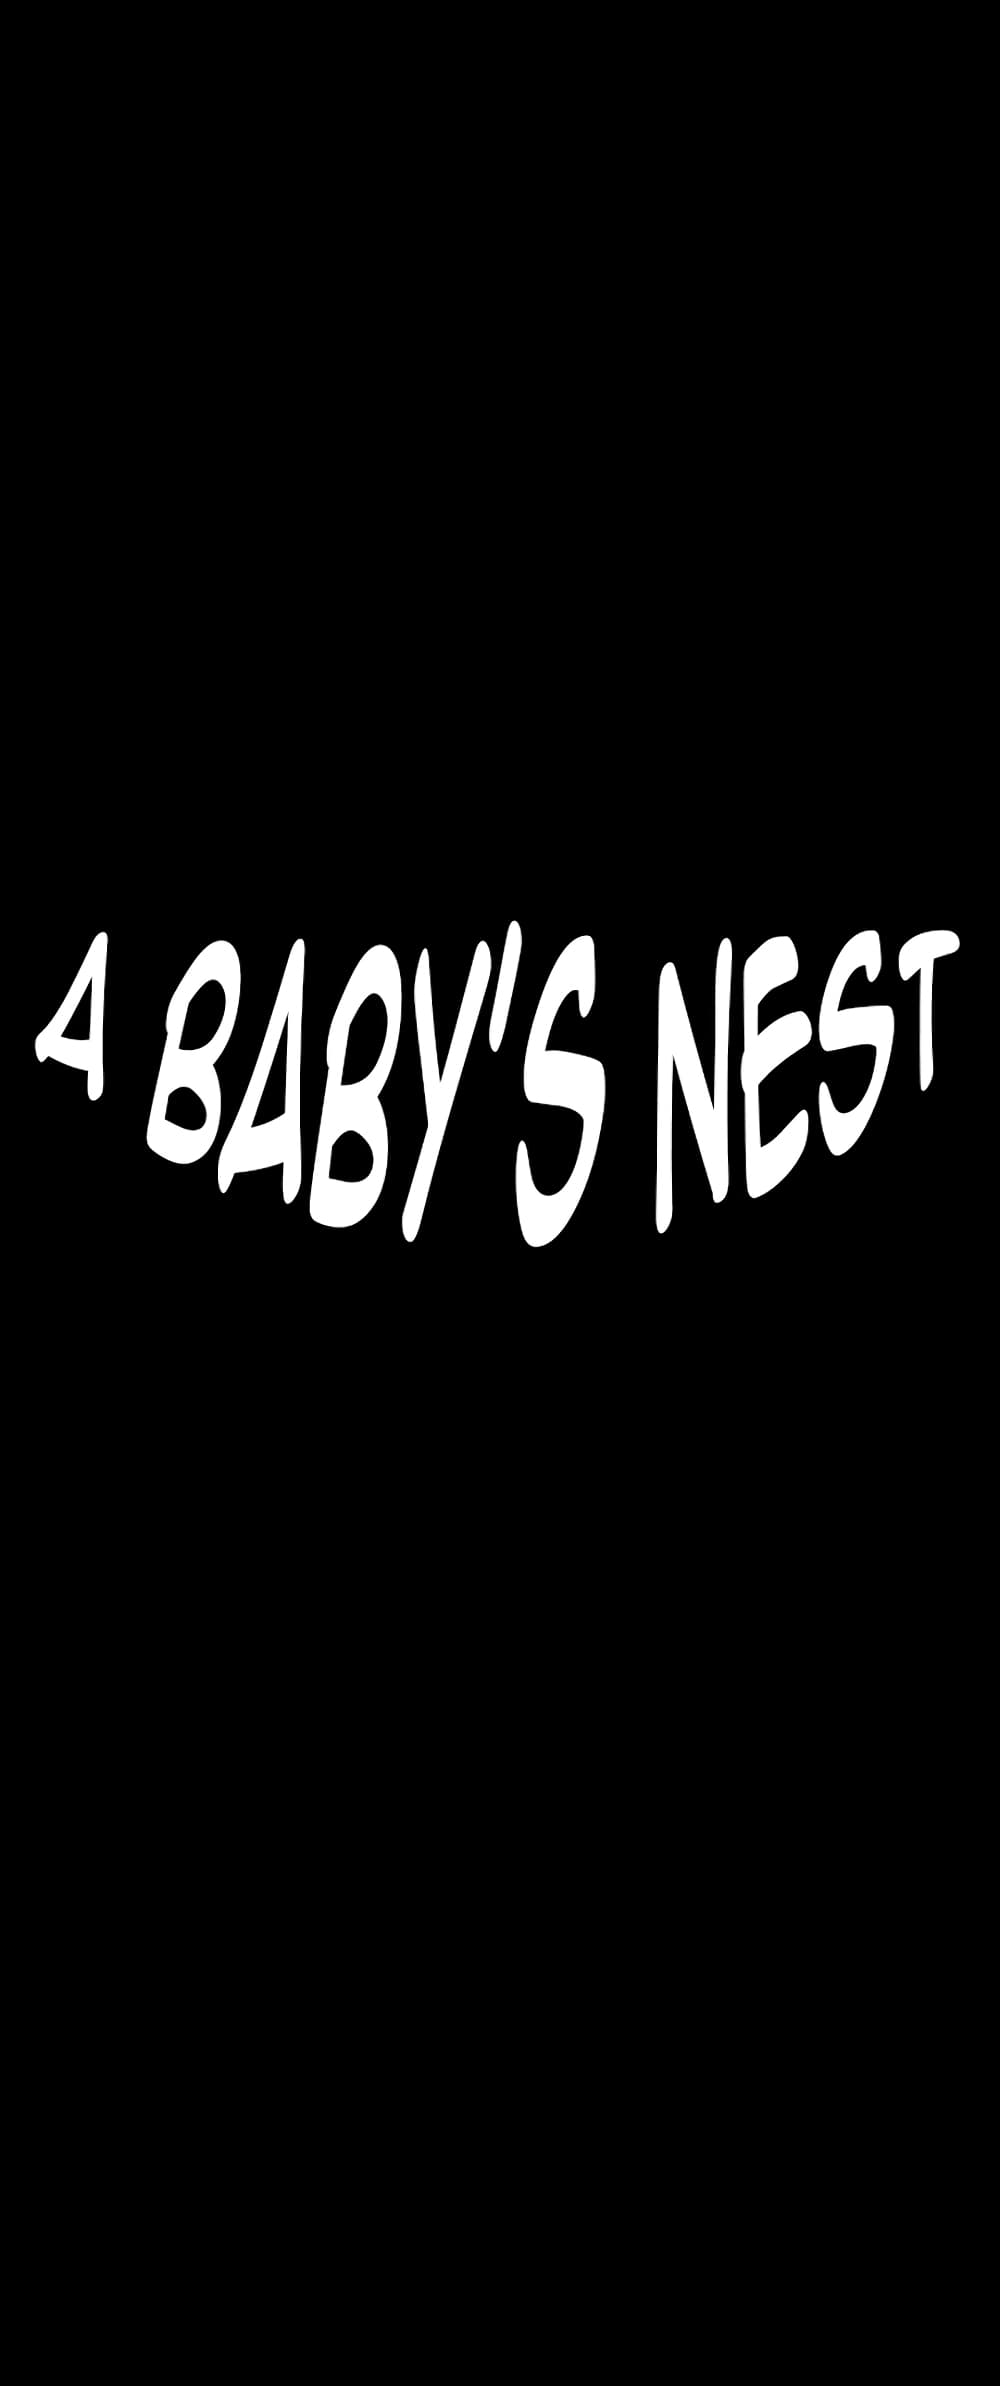 A Baby’s Nest